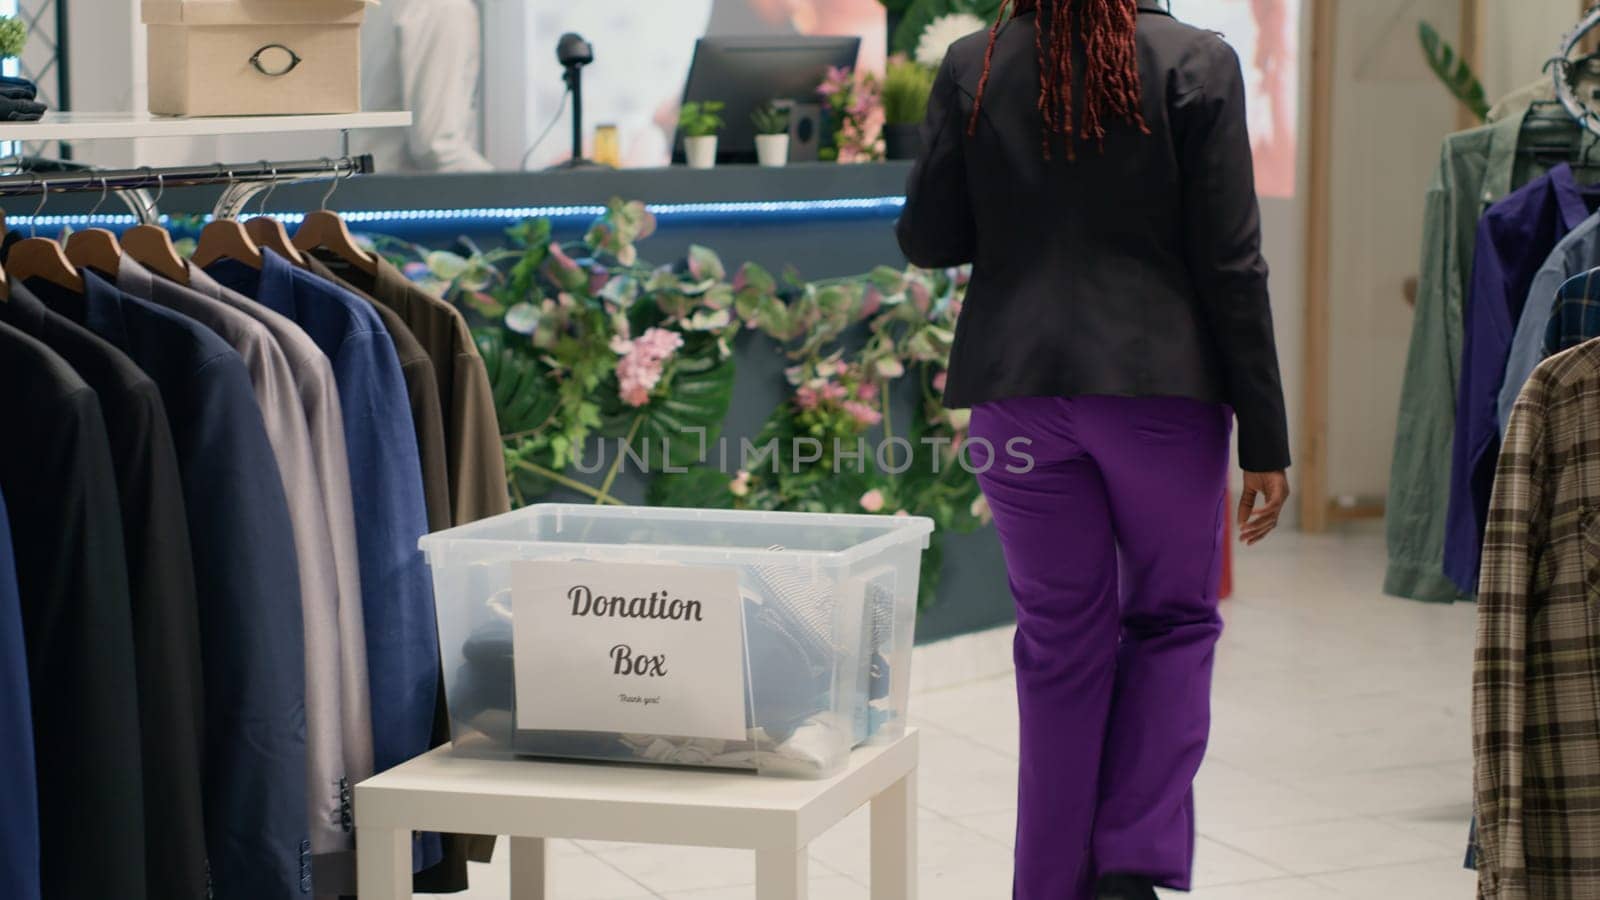 BIPOC shoppers in fancy fashion boutique donating their clothes for good cause. Customers placing garments in donation box, doing humanitarian gesture in premium clothing store